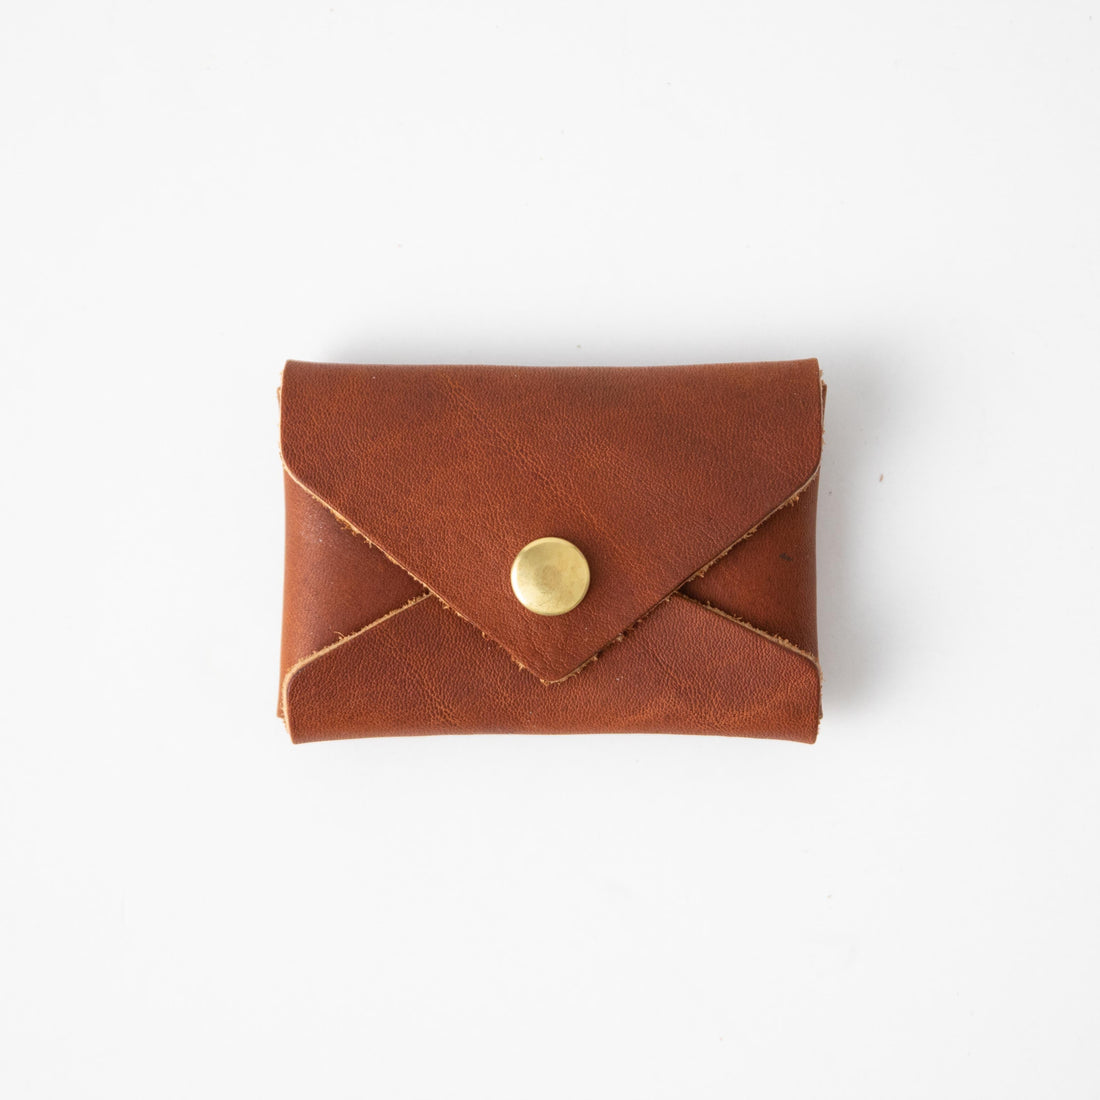 Cypress Card Envelope- card holder wallet - leather wallet made in America at KMM &amp; Co.